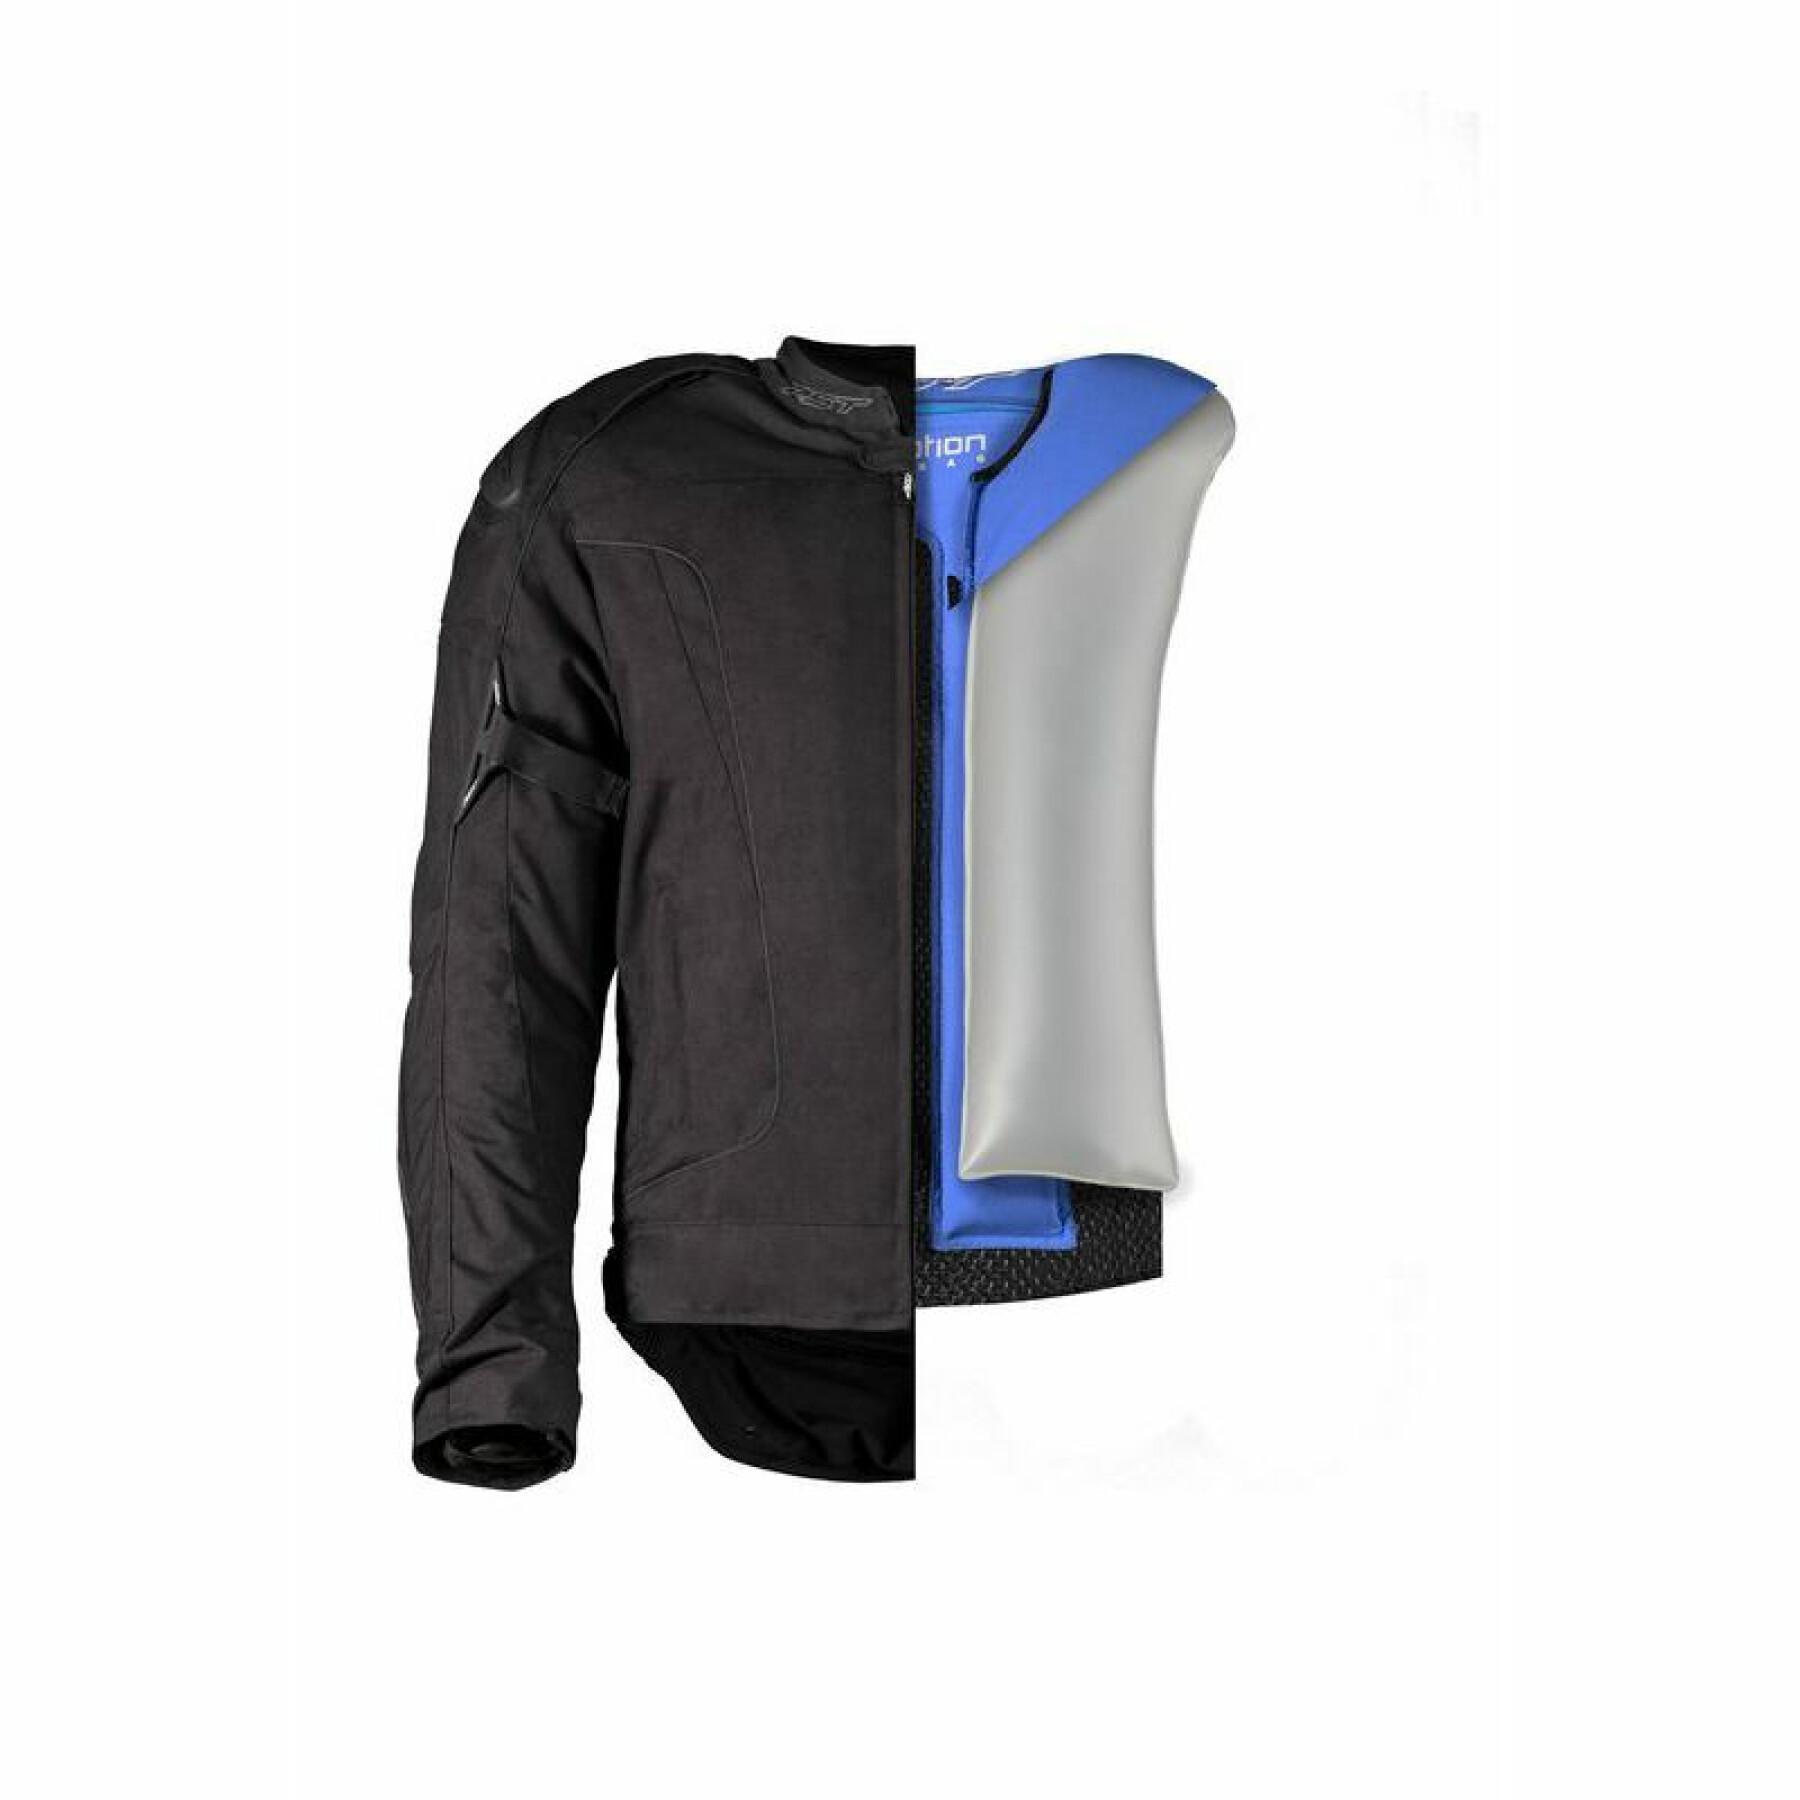 Motorcycle jacket RST GT Airbag CE